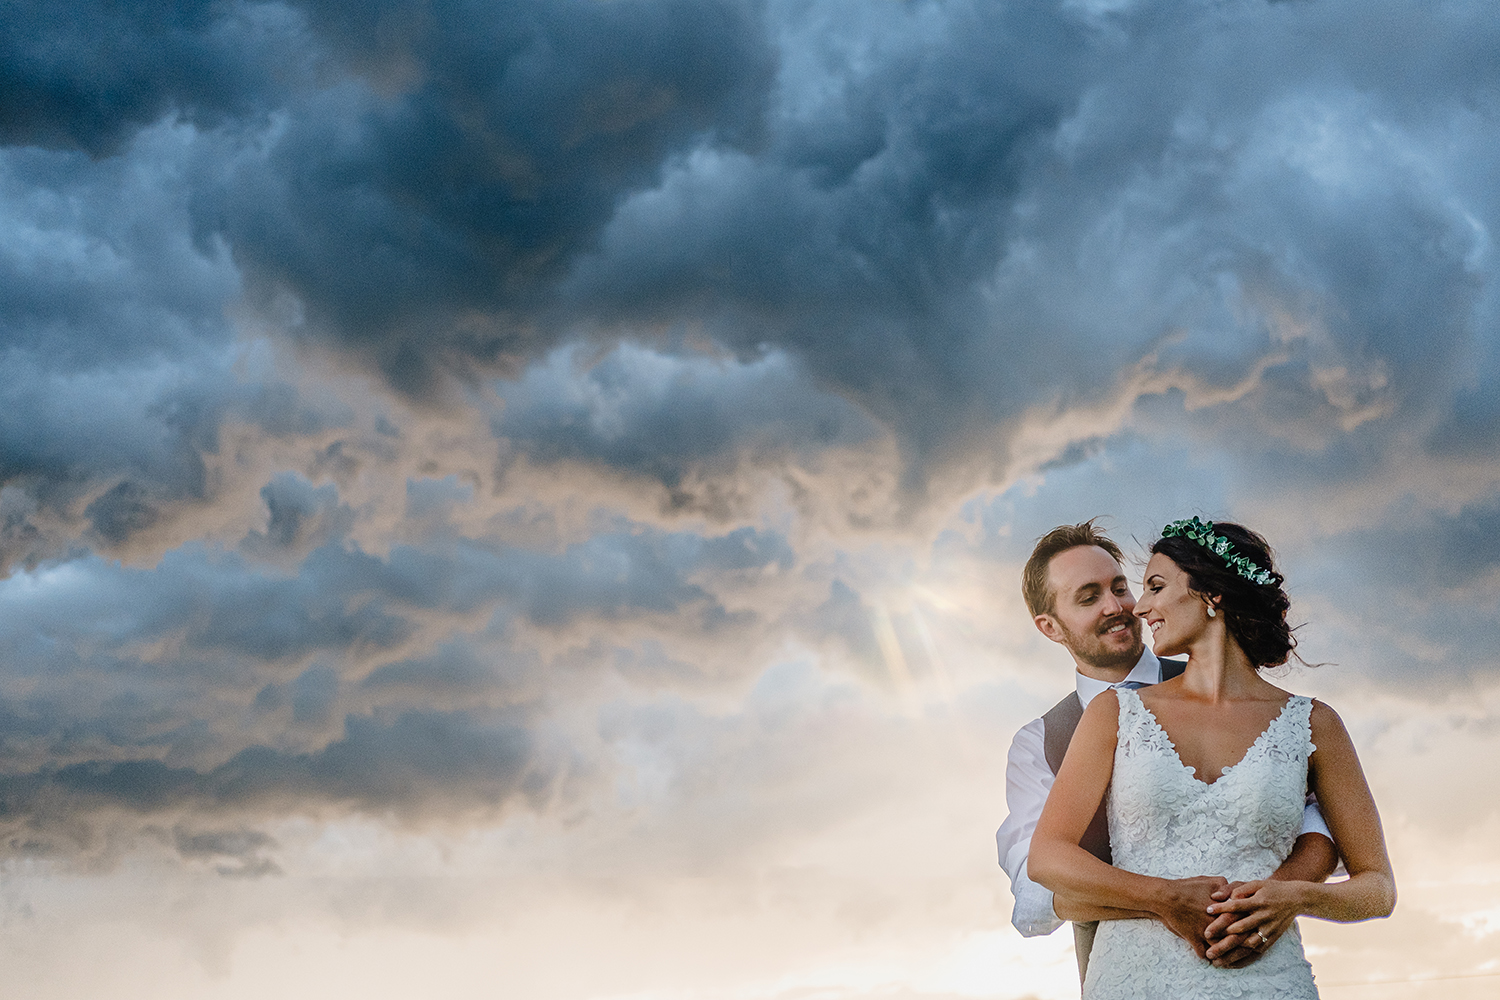 photo of bride and groom with a stormy sky during a metcalfe ontario wedding reception